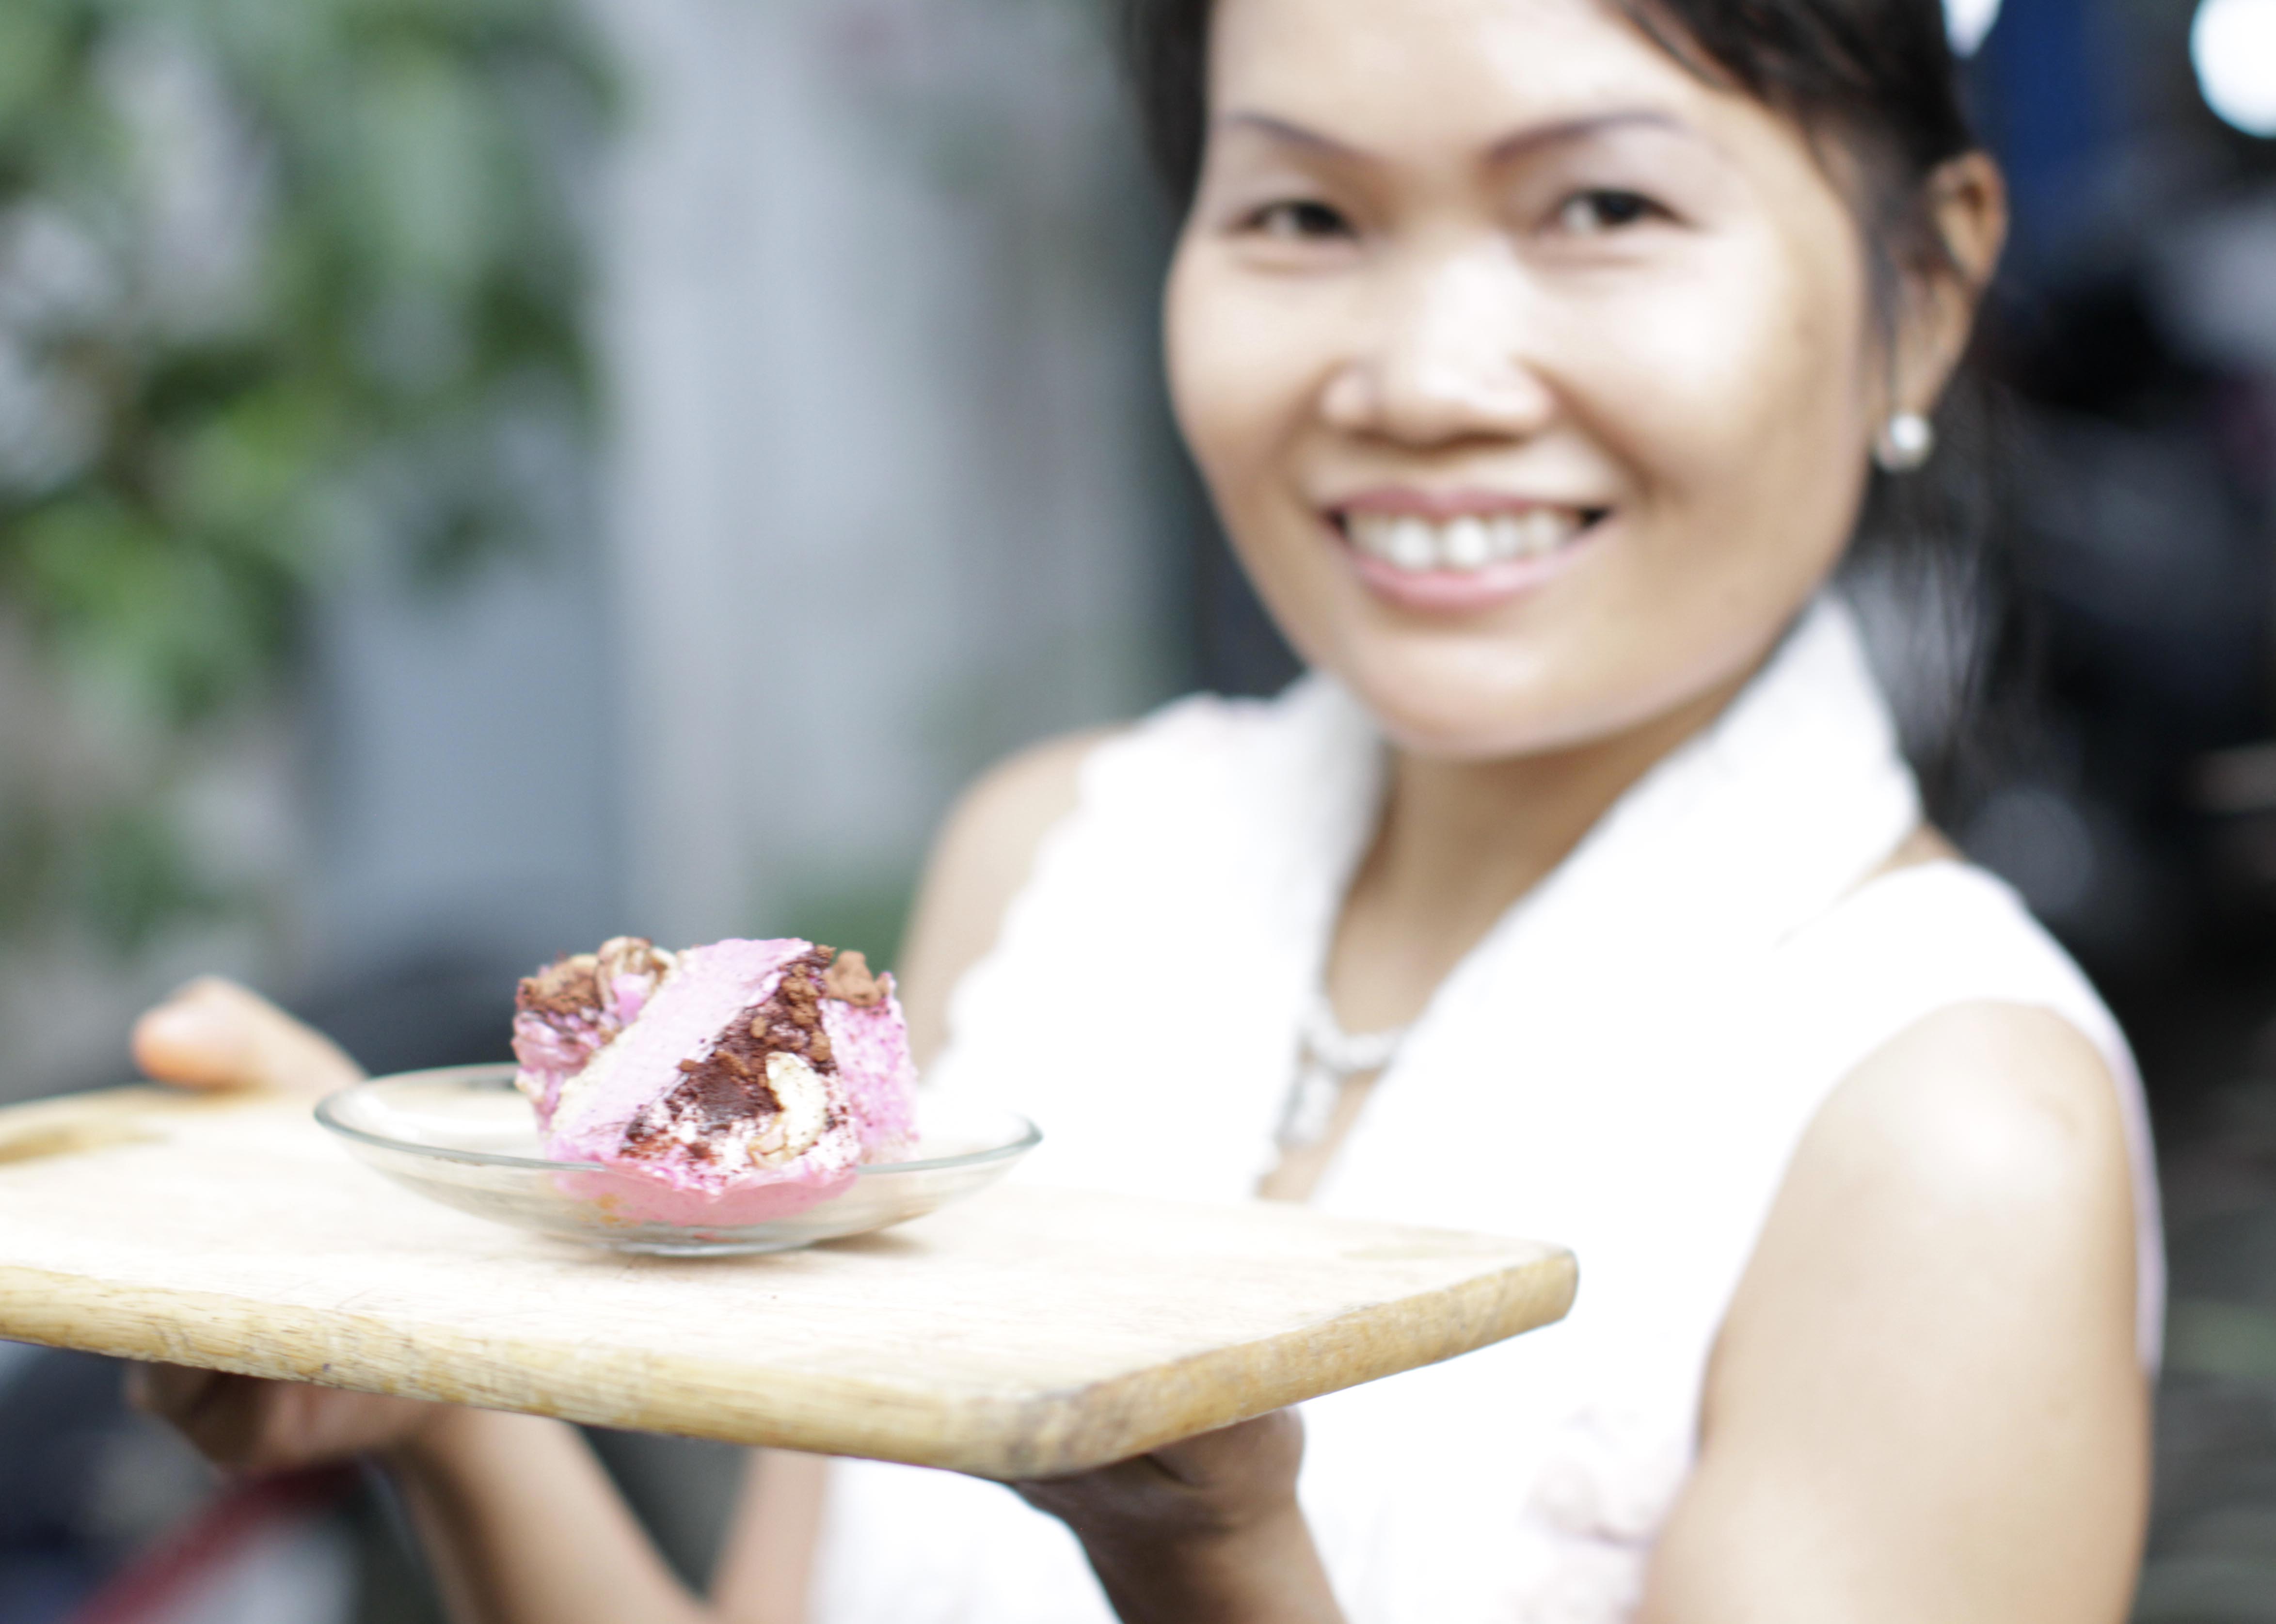 Our founder May holiding a plate of vegan magenta dragonfruit ice cream cake.